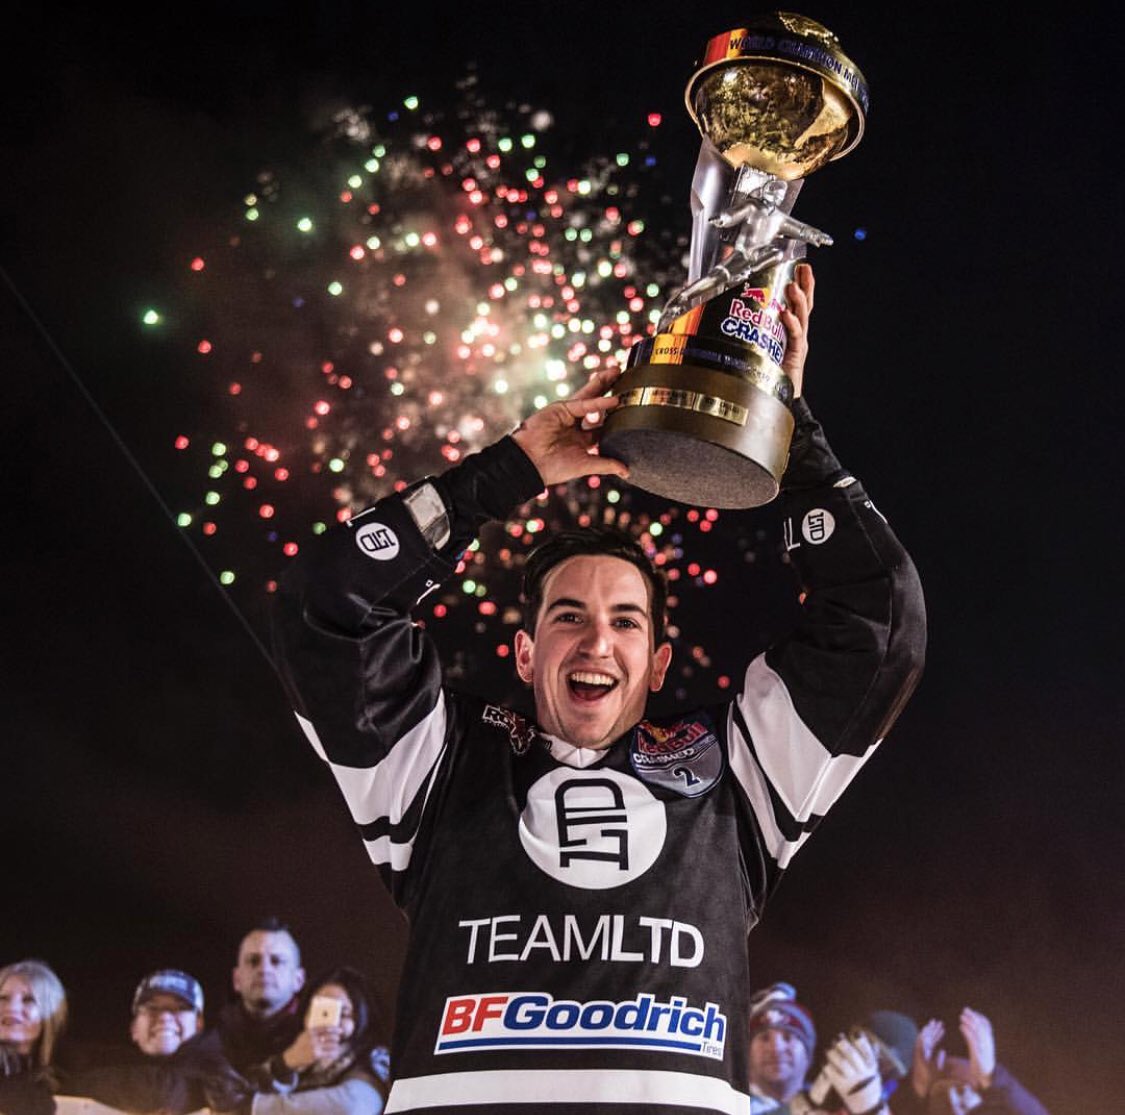 Congrats @ScottCroxy for taking home the 2018 @CrashedIce Championship !🏆